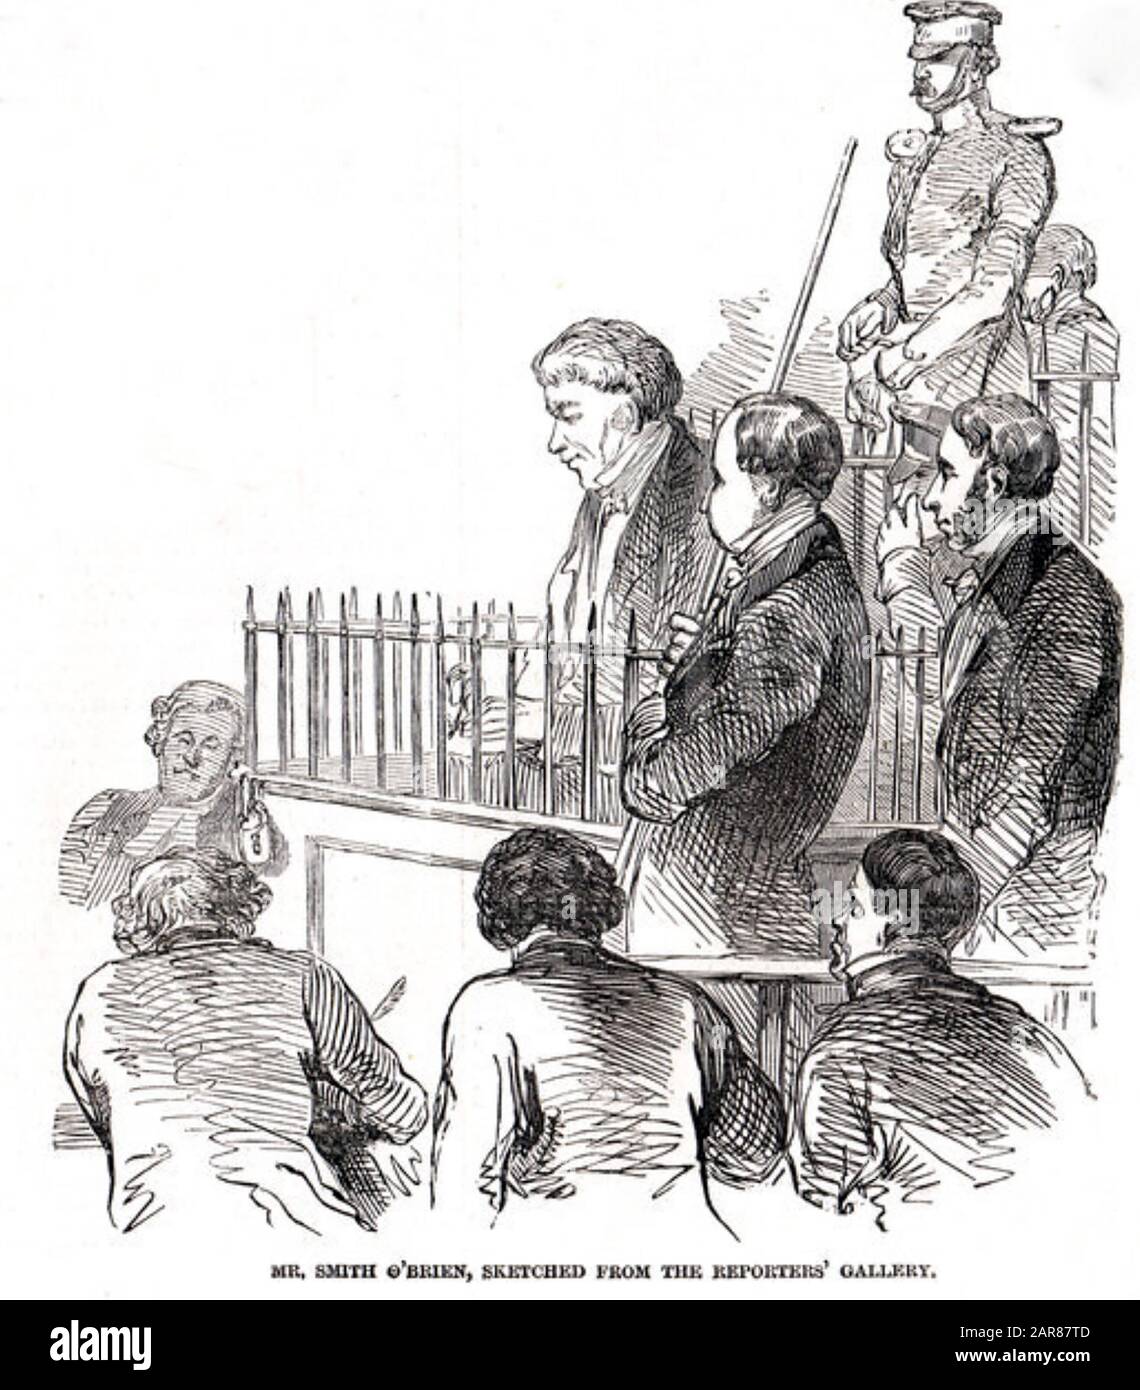 WILLIAM SMITH O'BRIEN (1803-1864) Irish nationalist MP and leader of the Young Ireland movement at his 1848 trial. Stock Photo